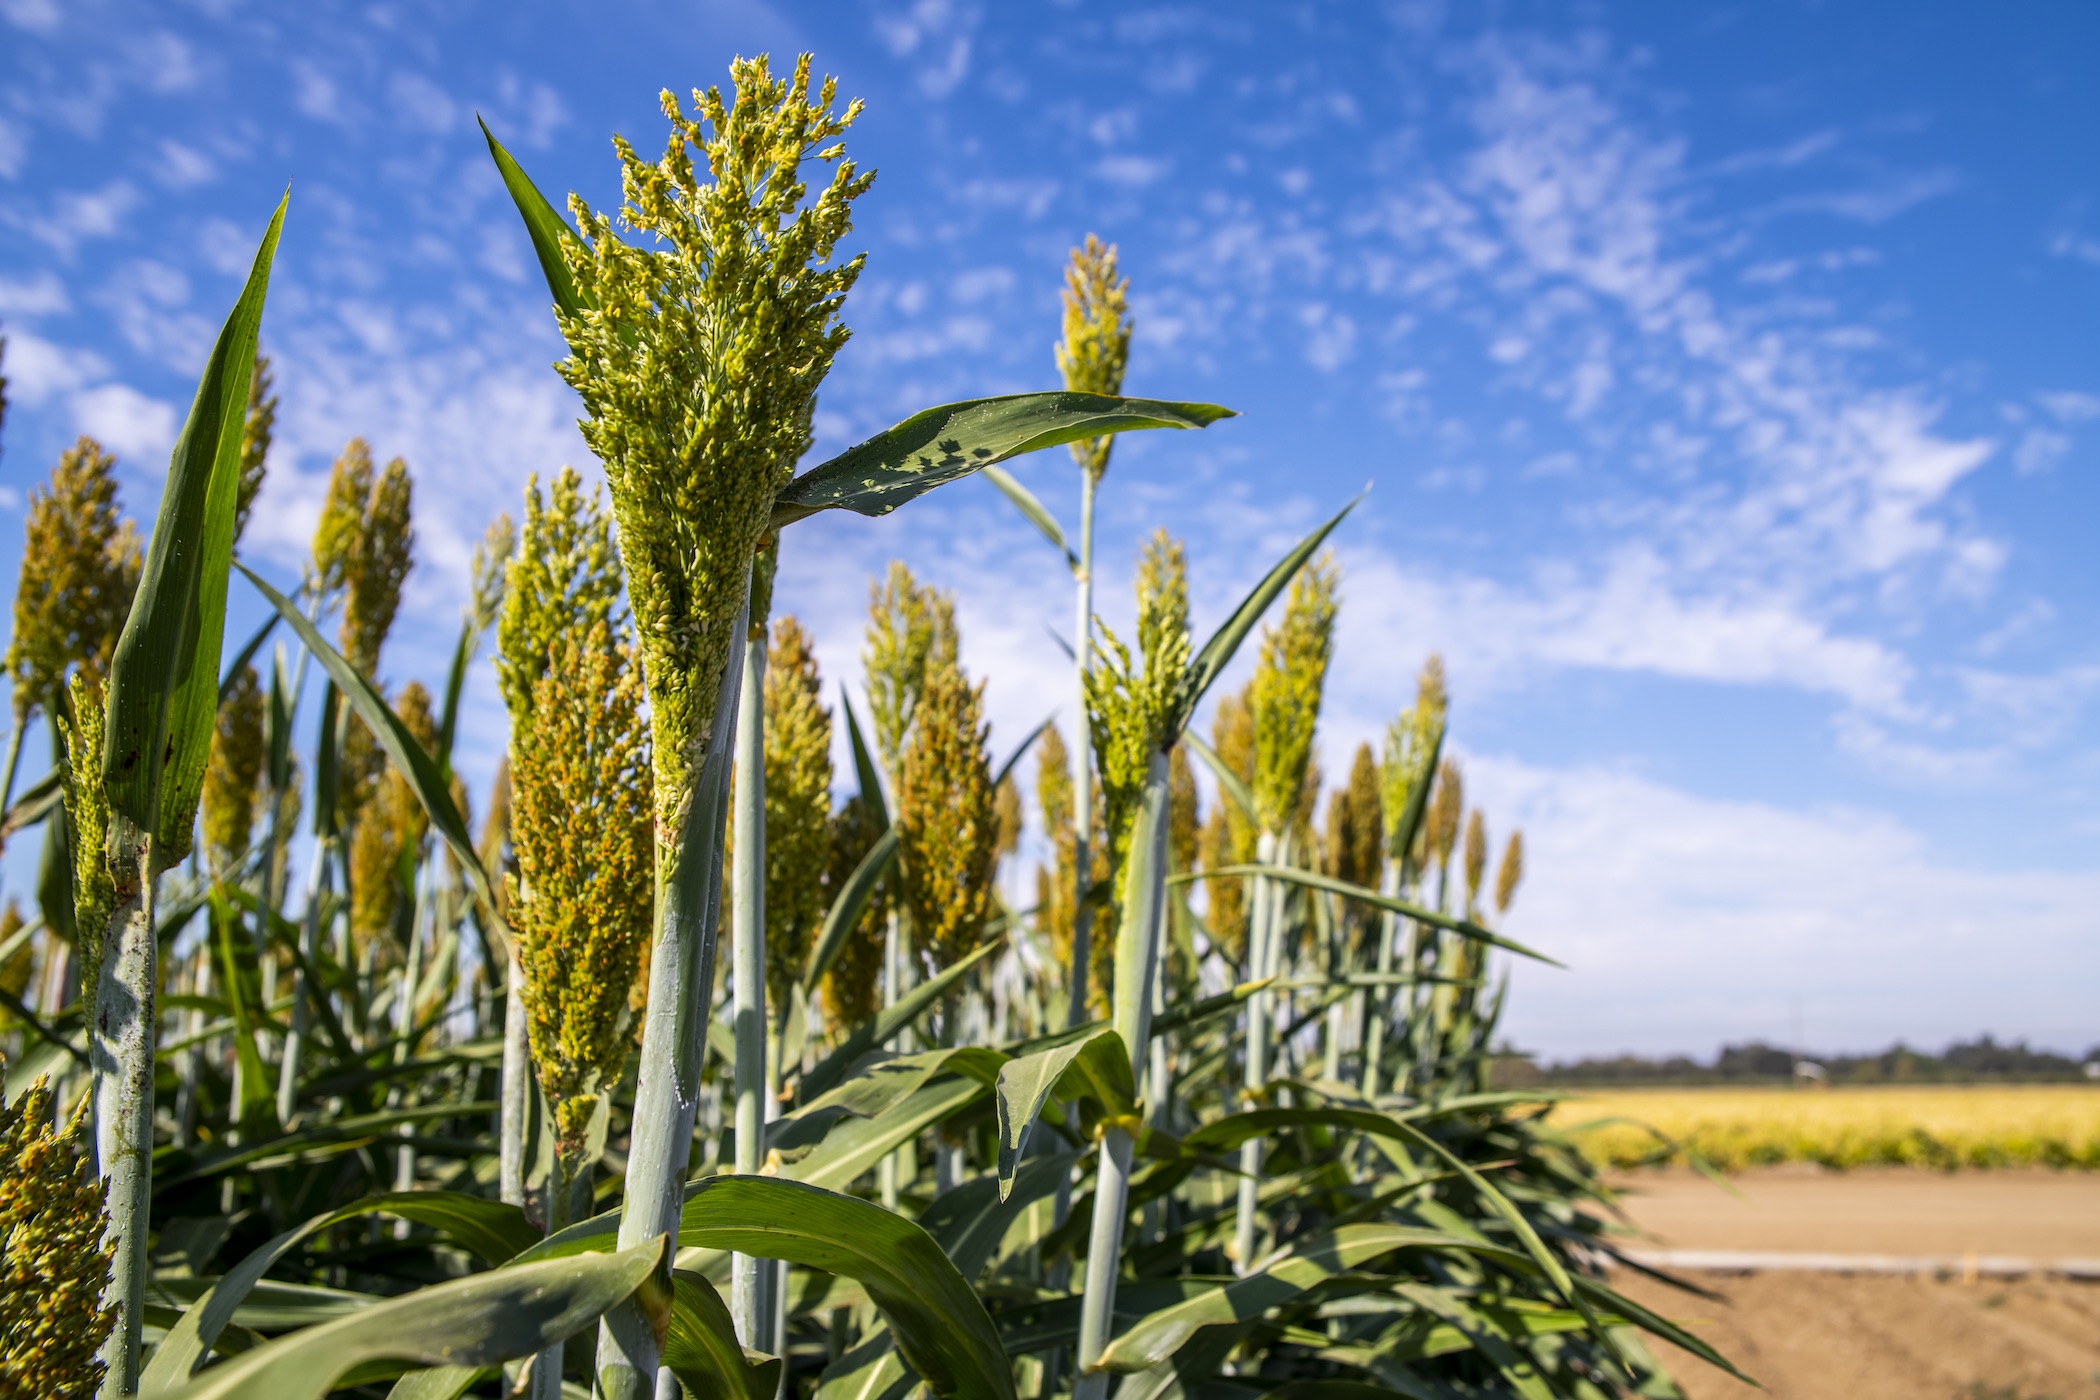 A field of sorghum, a grain that is often used as a biomass crop for production of ethanol and butanol.